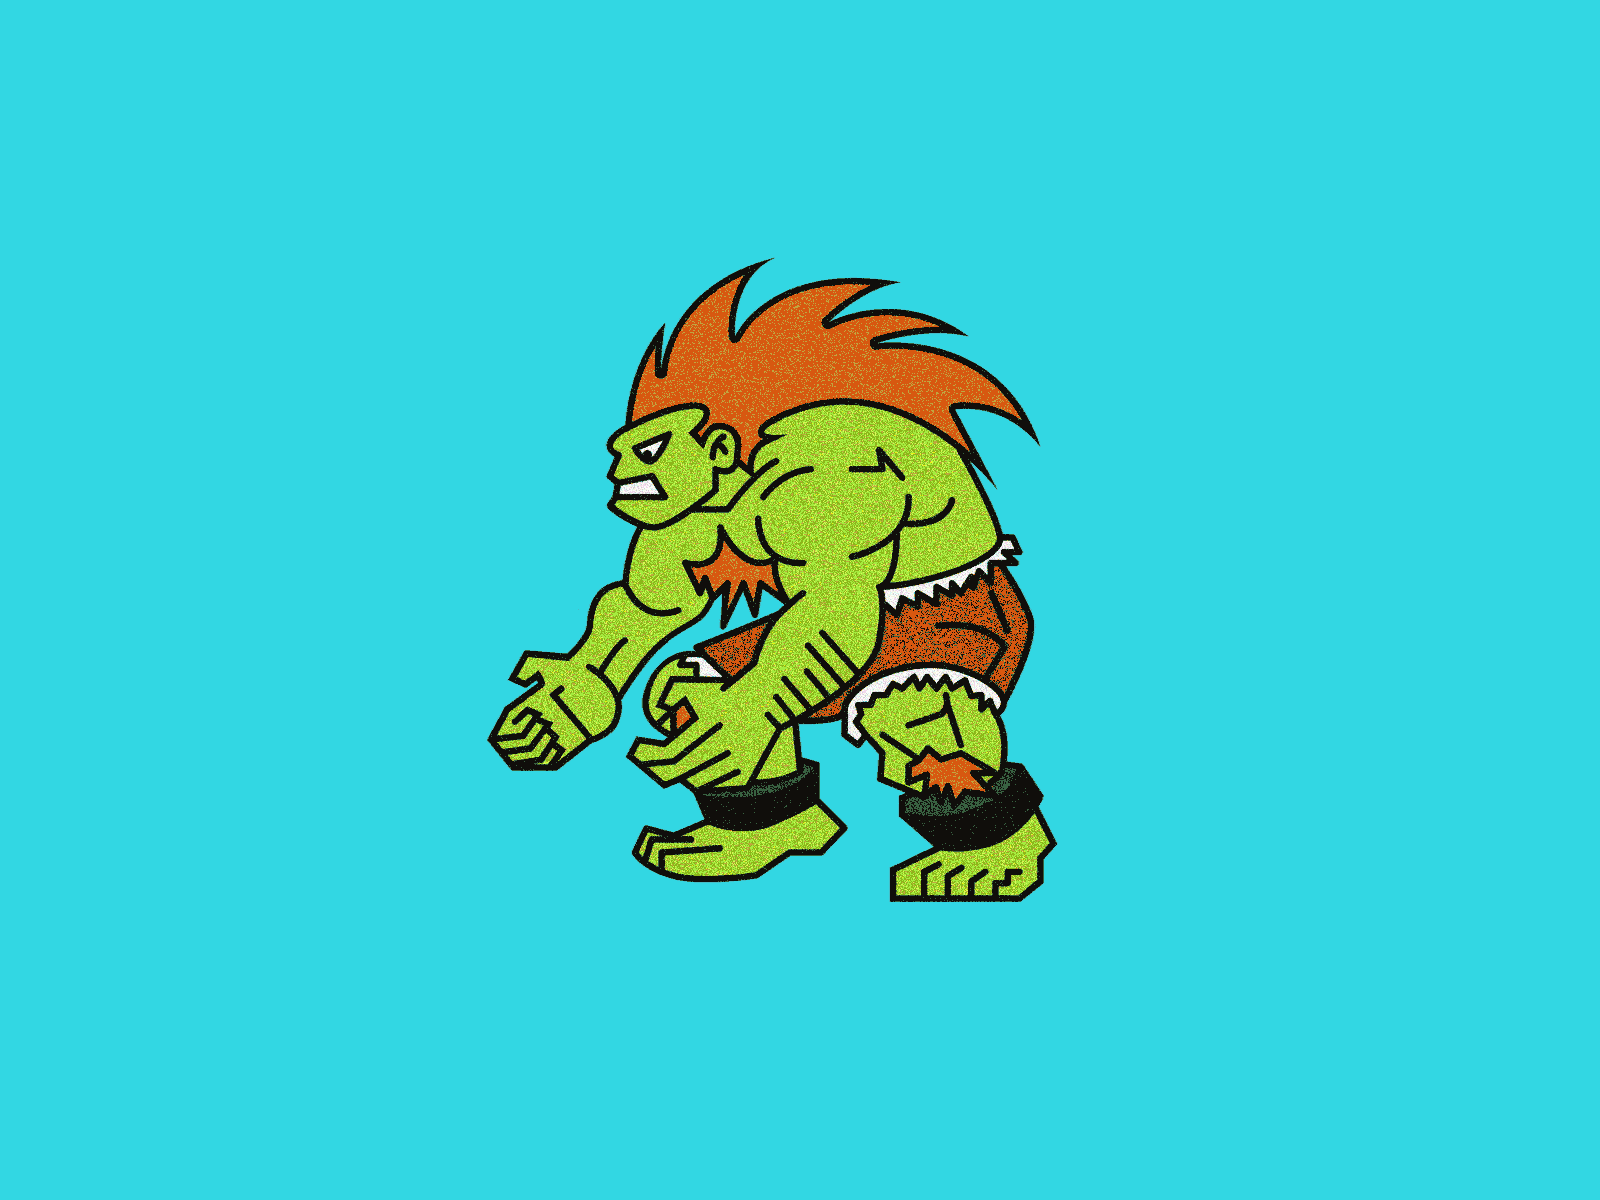 Blanka (version 1) after effects animation arcade blanka cartoon concept electric electricity expressions gaming illustration illustrator retro gaming rough sketch street fighter vector vibrate wiggle